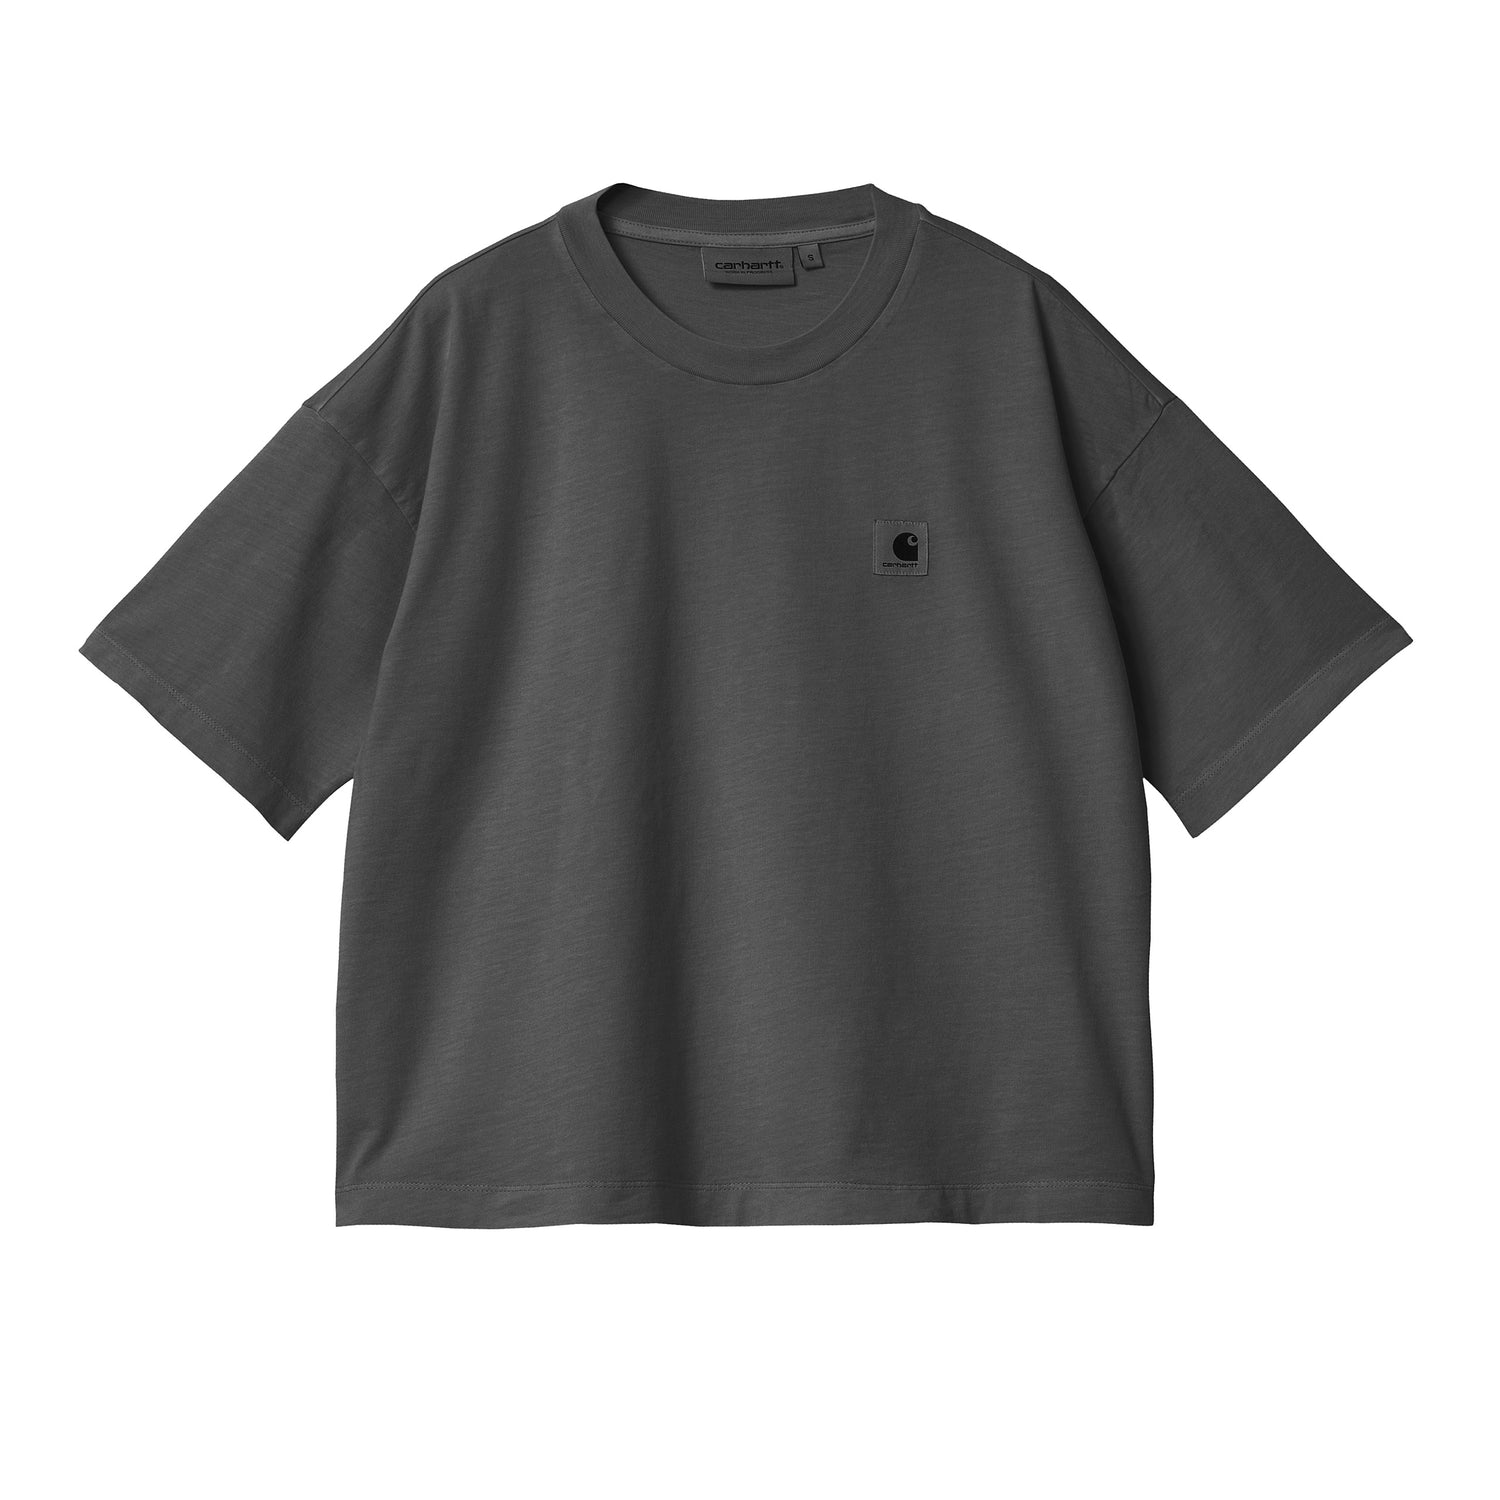 W' S/S NELSON T-SHIRT CHARCOAL GARMENT DYED